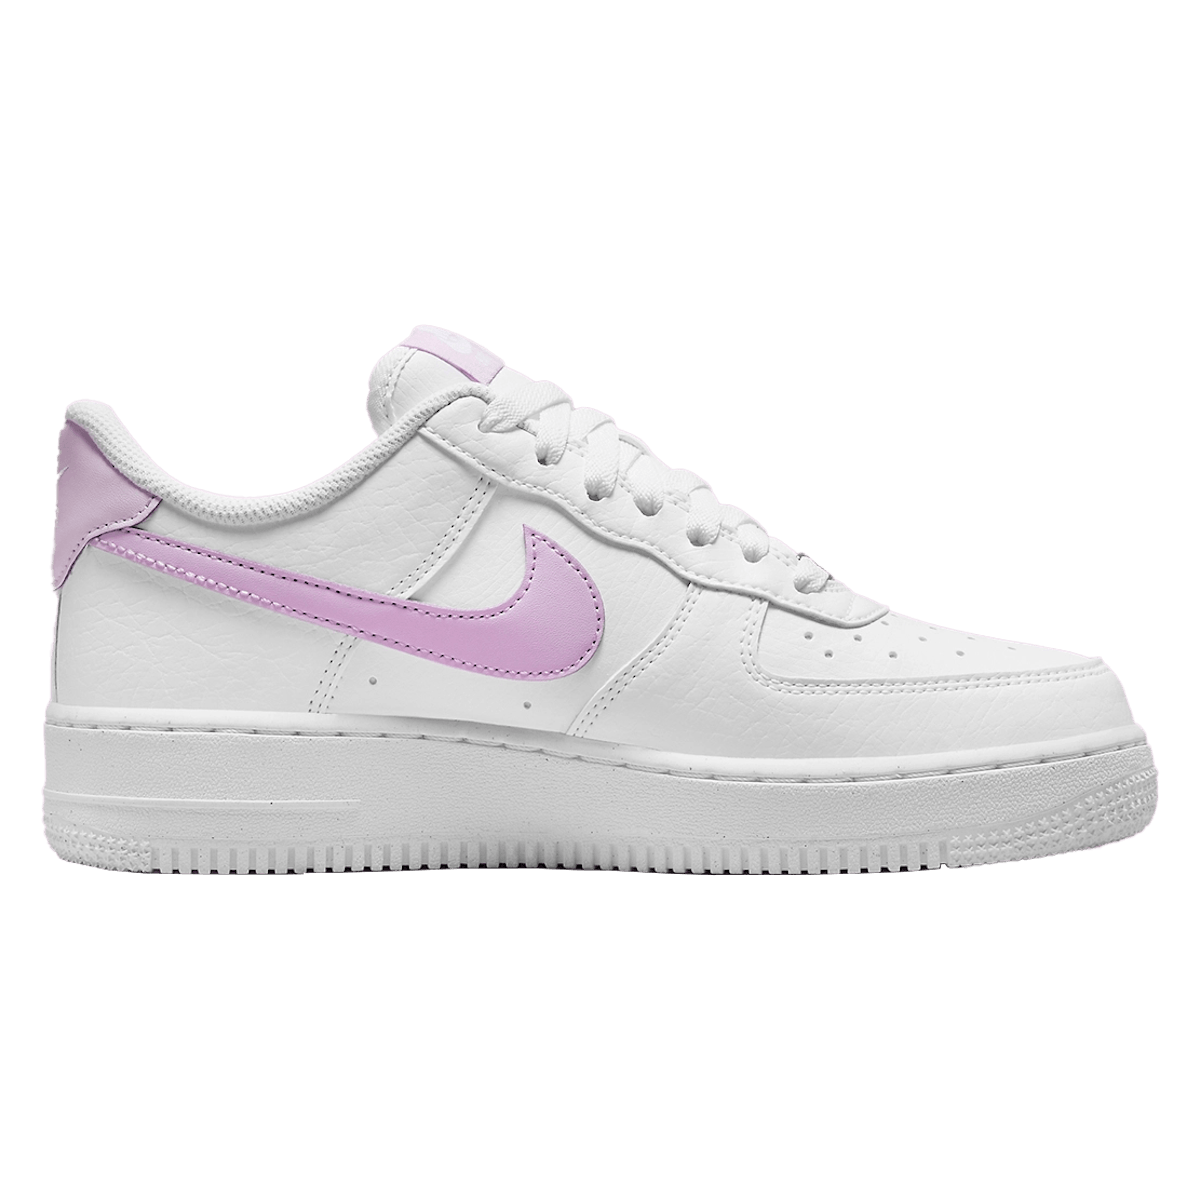 Nike Air Force 1 '07 Next Nature "Doll"